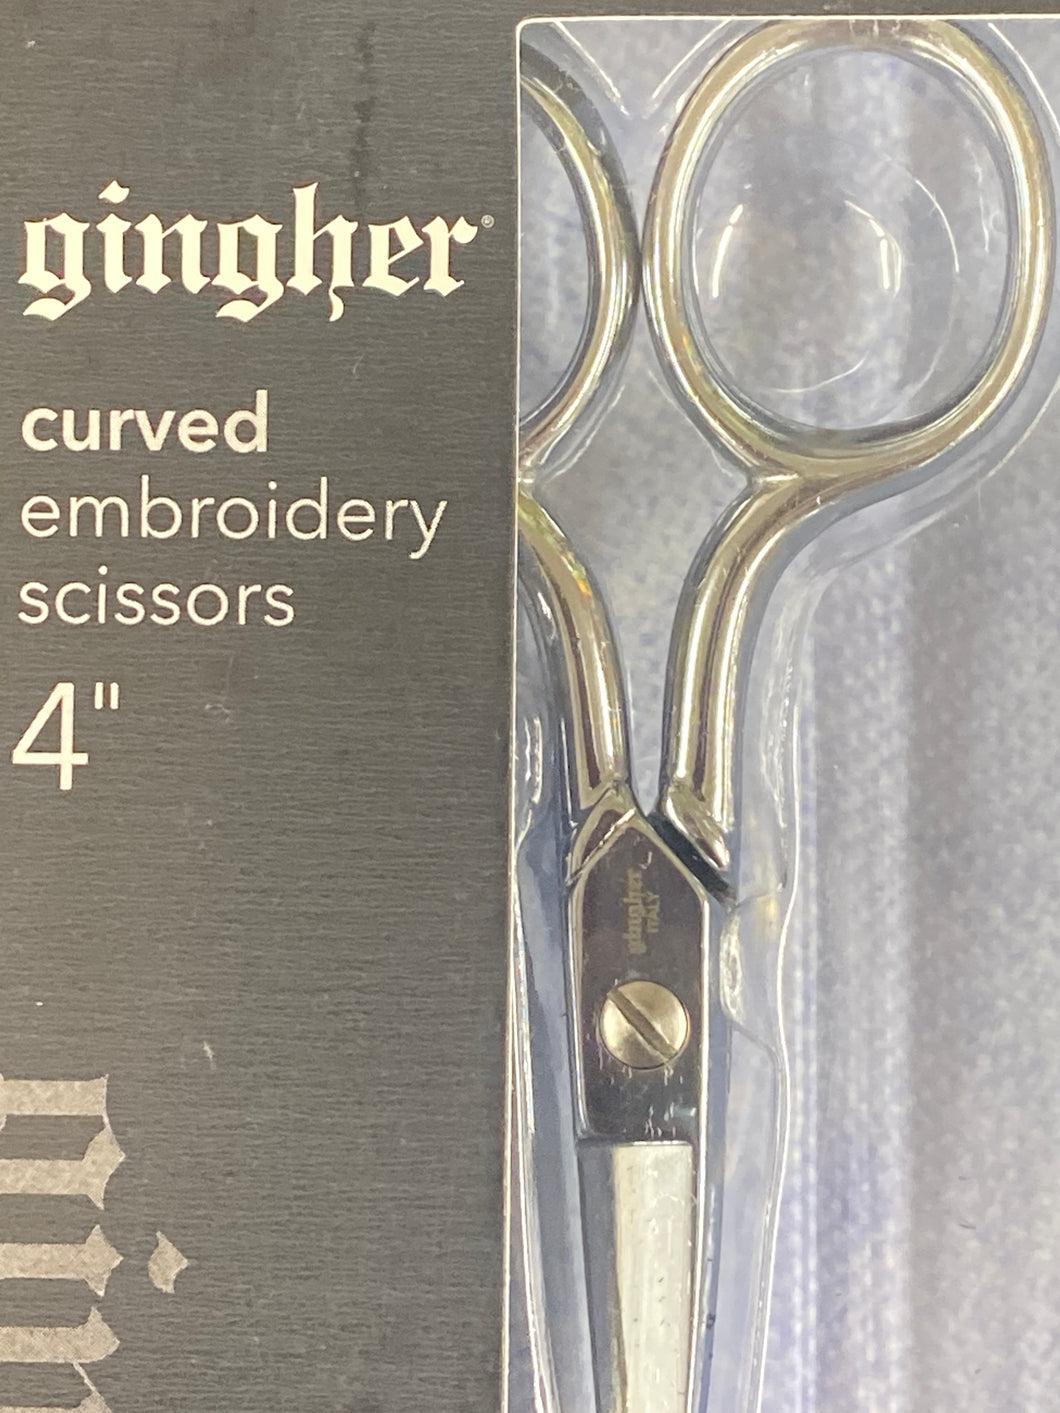 Gingher curved embroidery scissors 4